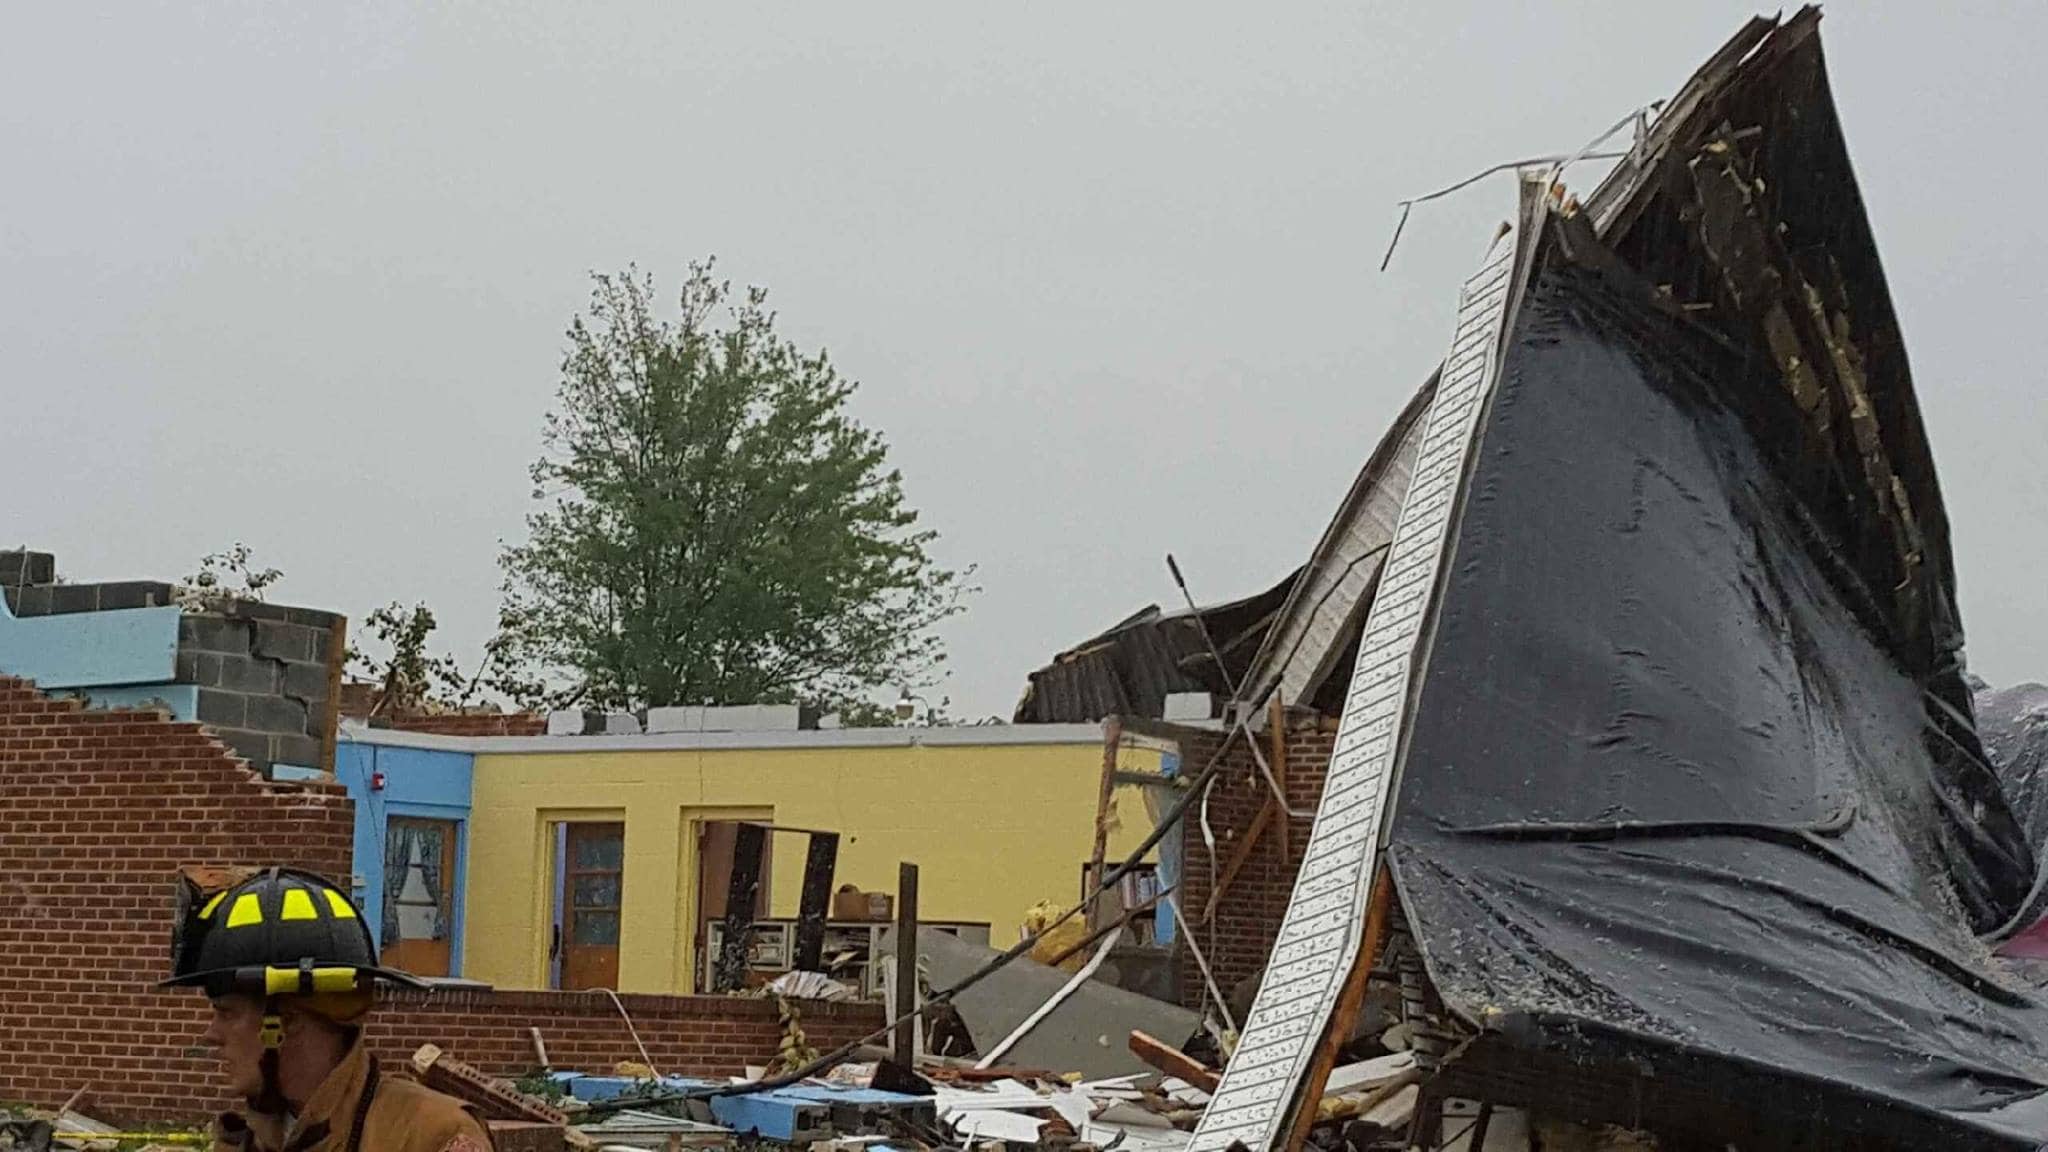 The storm tore the roof off the school in Hamburg, Pennsylvania. (Facebook)